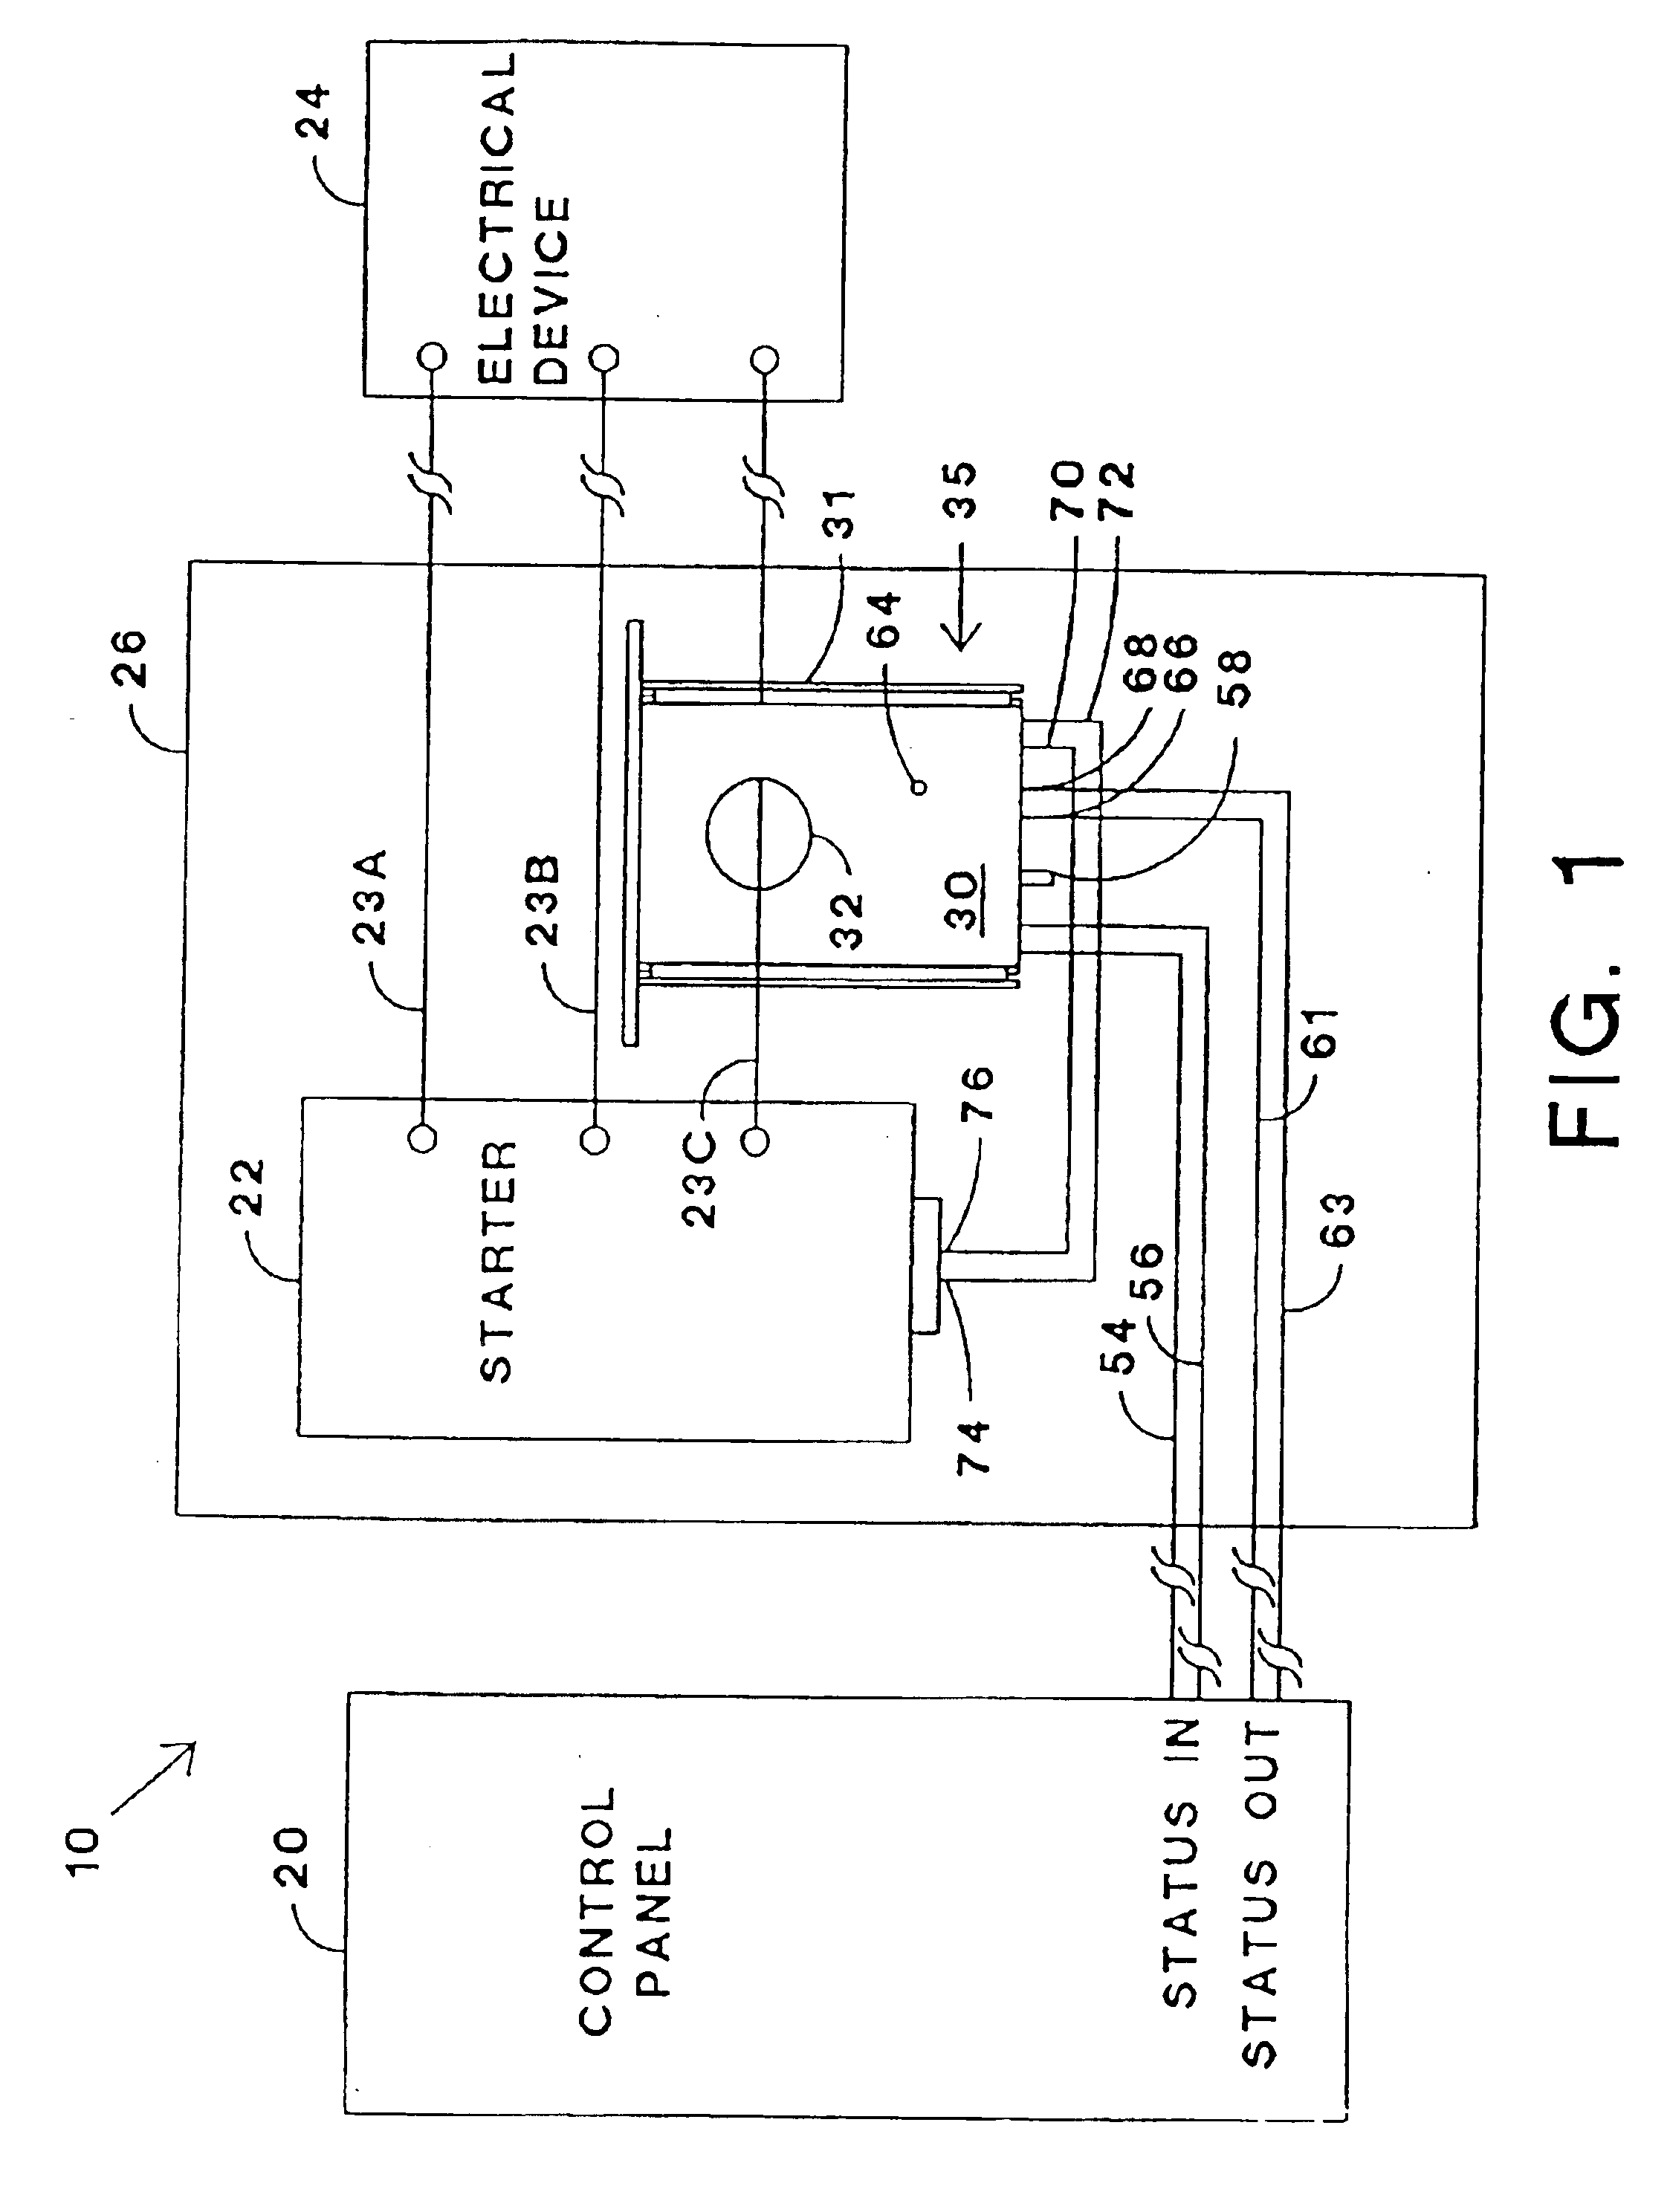 Combination current sensor and relay